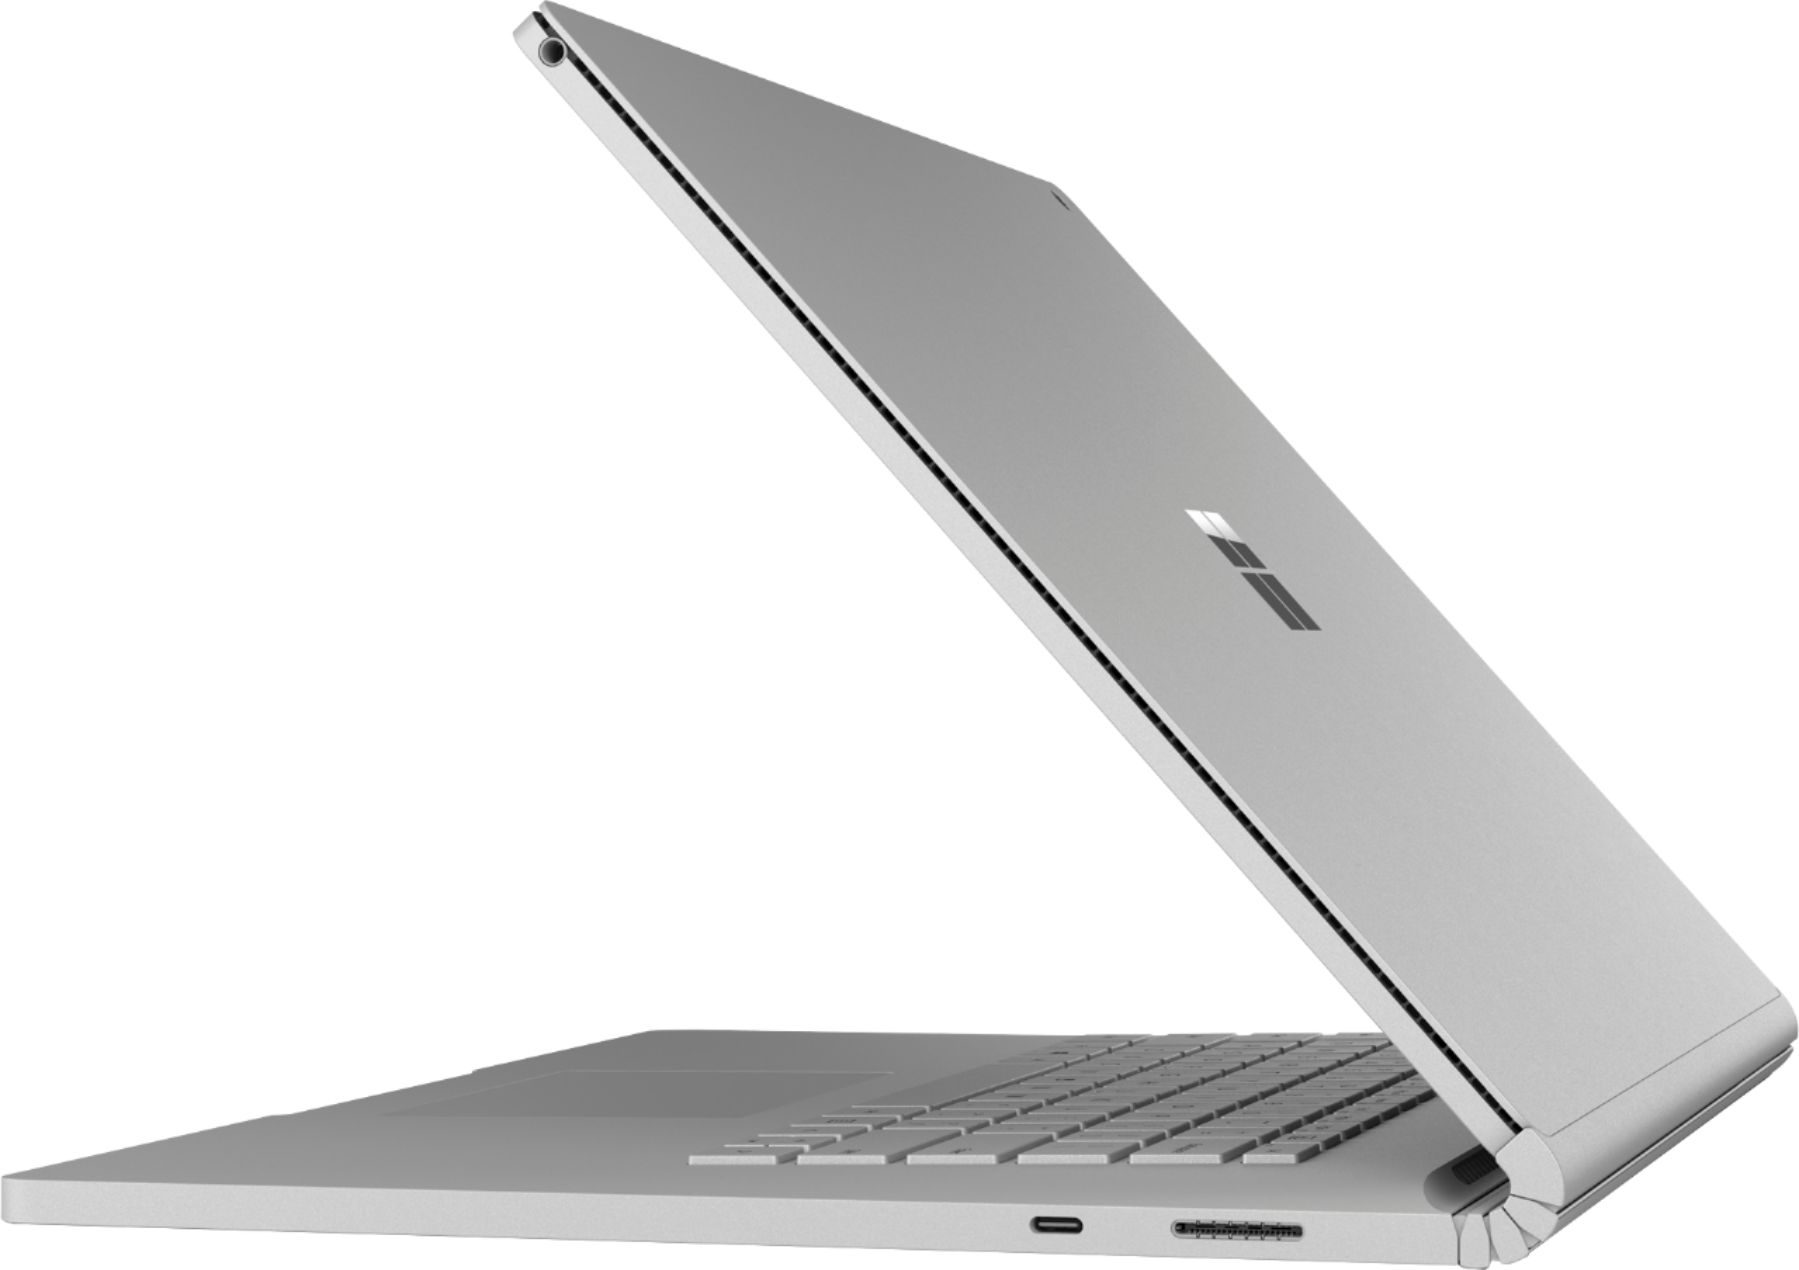 Left View: Microsoft - Geek Squad Certified Refurbished Surface Laptop 3 13.5" Touch-Screen - Intel Core i5 - 8GB Memory - 256GB SSD - Cobalt Blue